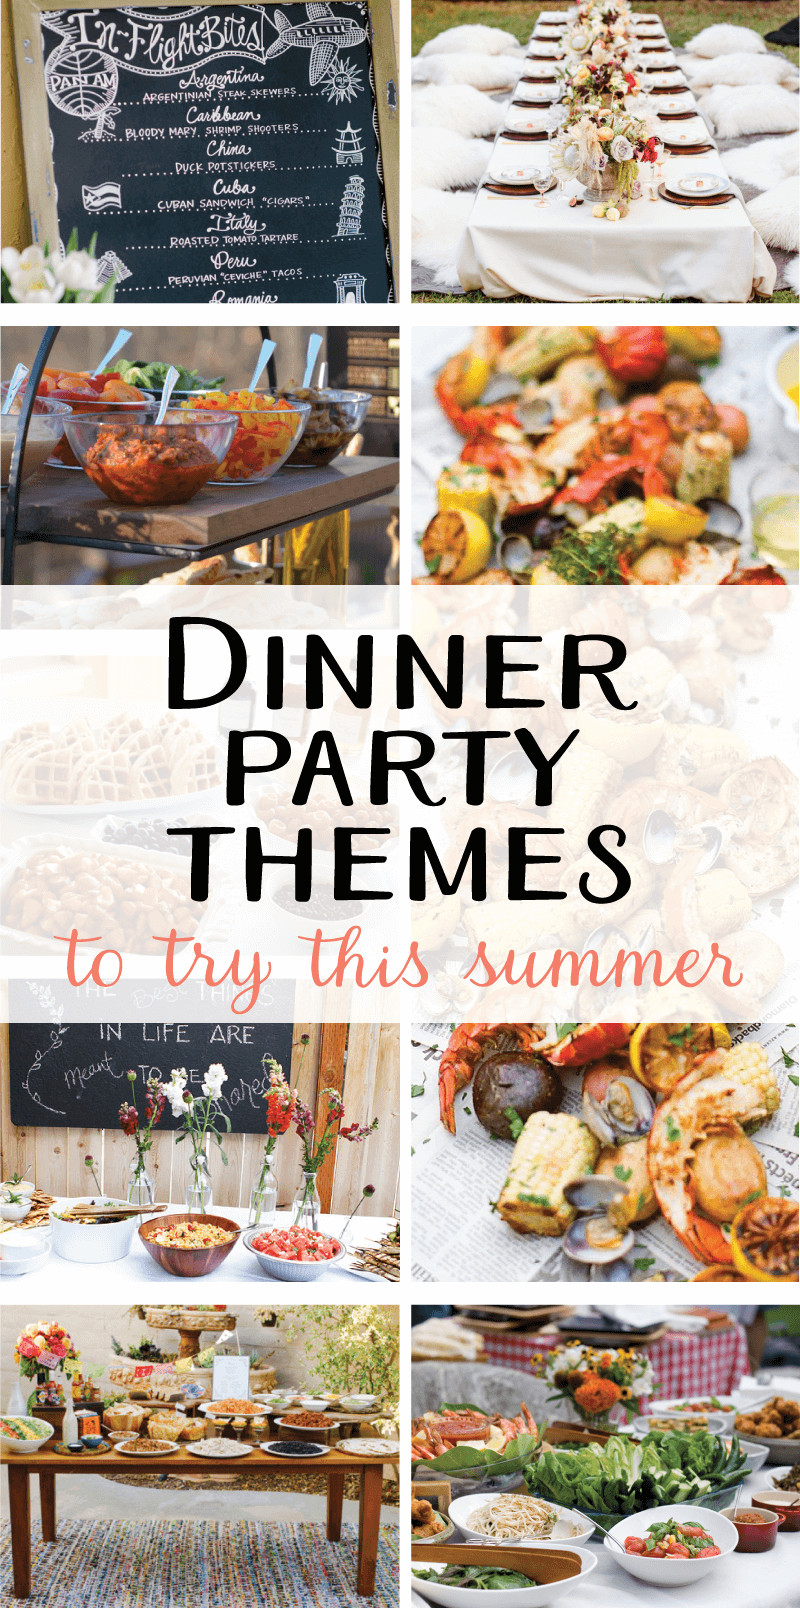 Menu Ideas For Summer Dinner Party
 9 Creative Dinner Party Themes to try this Summer on Love